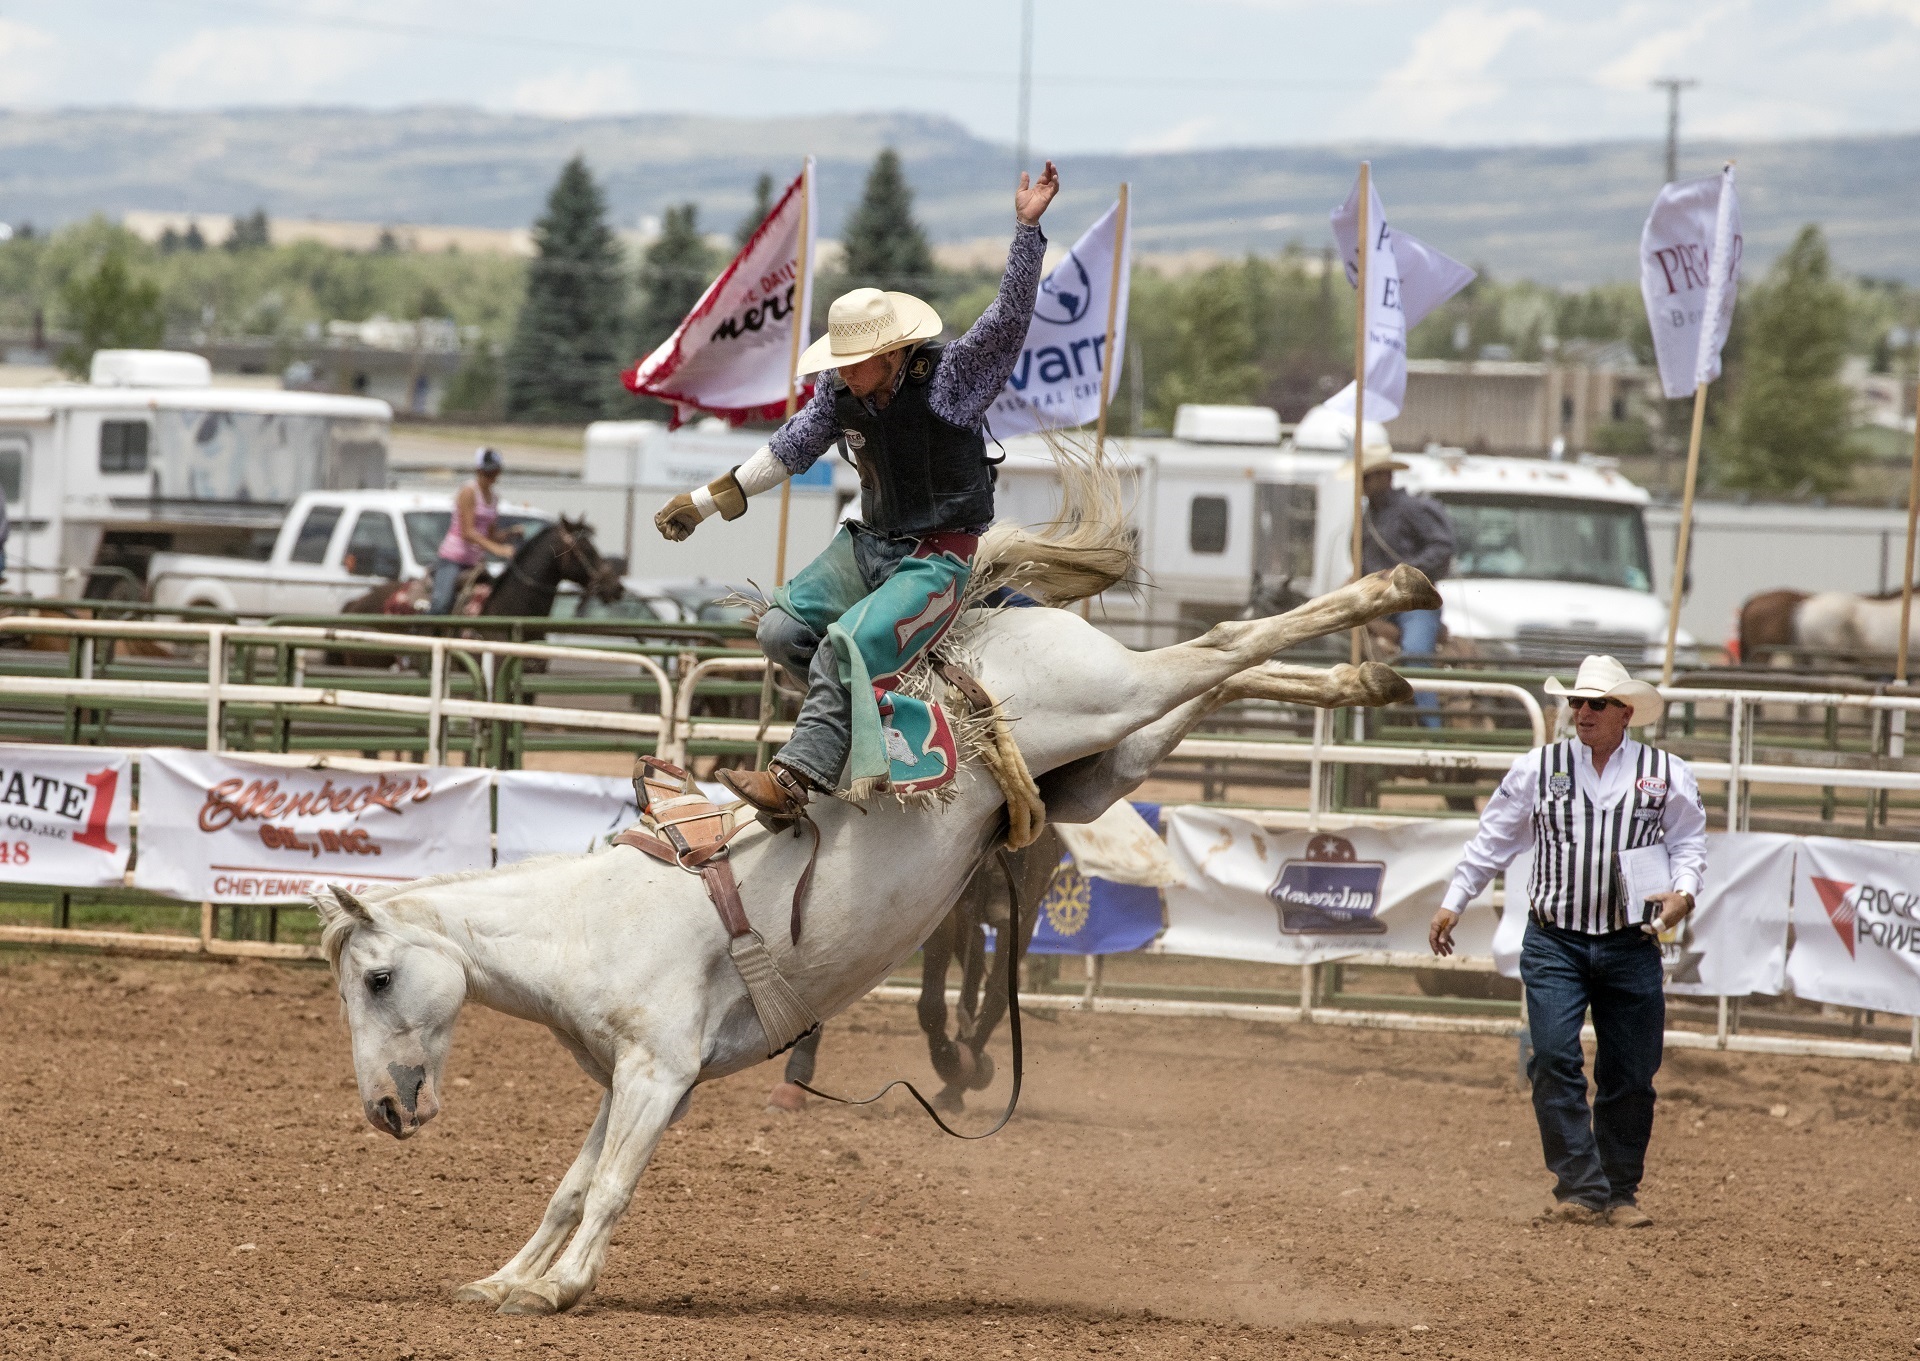 Thrown off a bucking bronco in a rodeo by skeeze